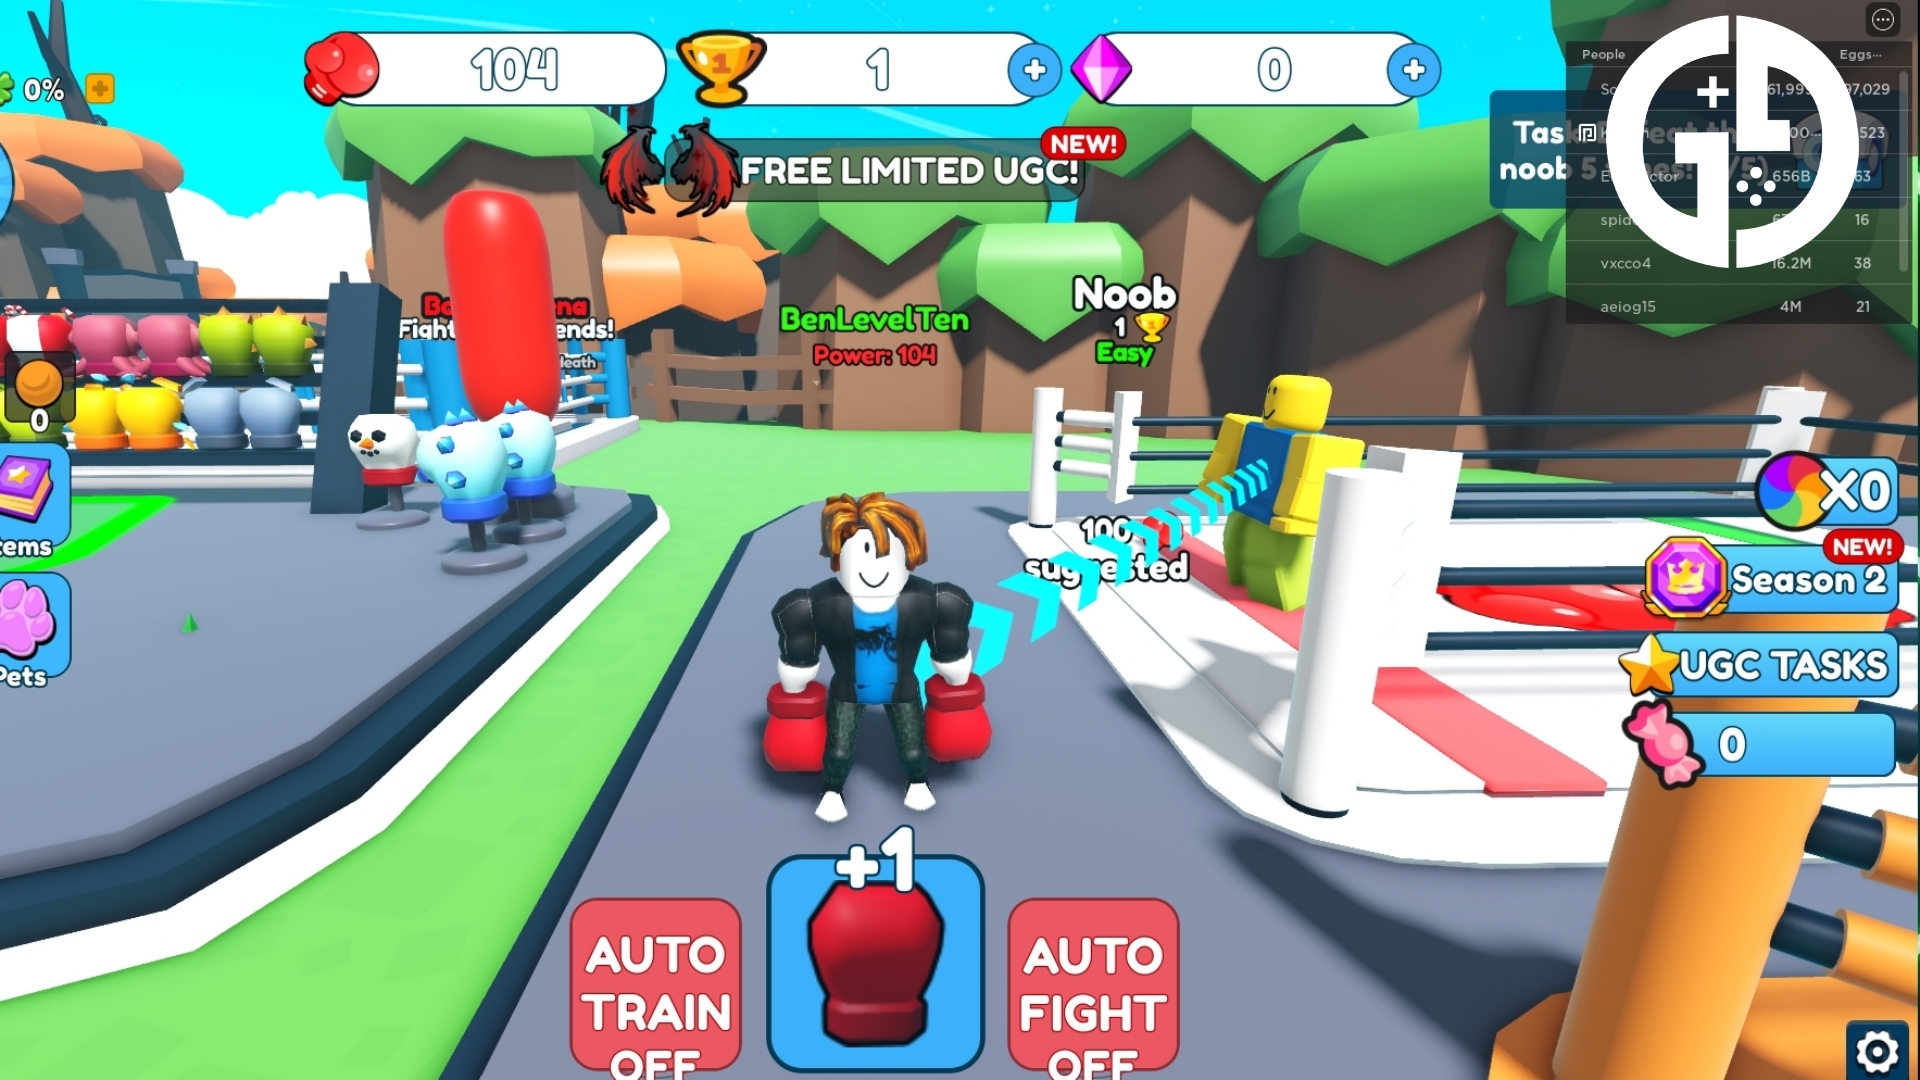 FREE LIMITED] Punch Simulator 👊 - Roblox